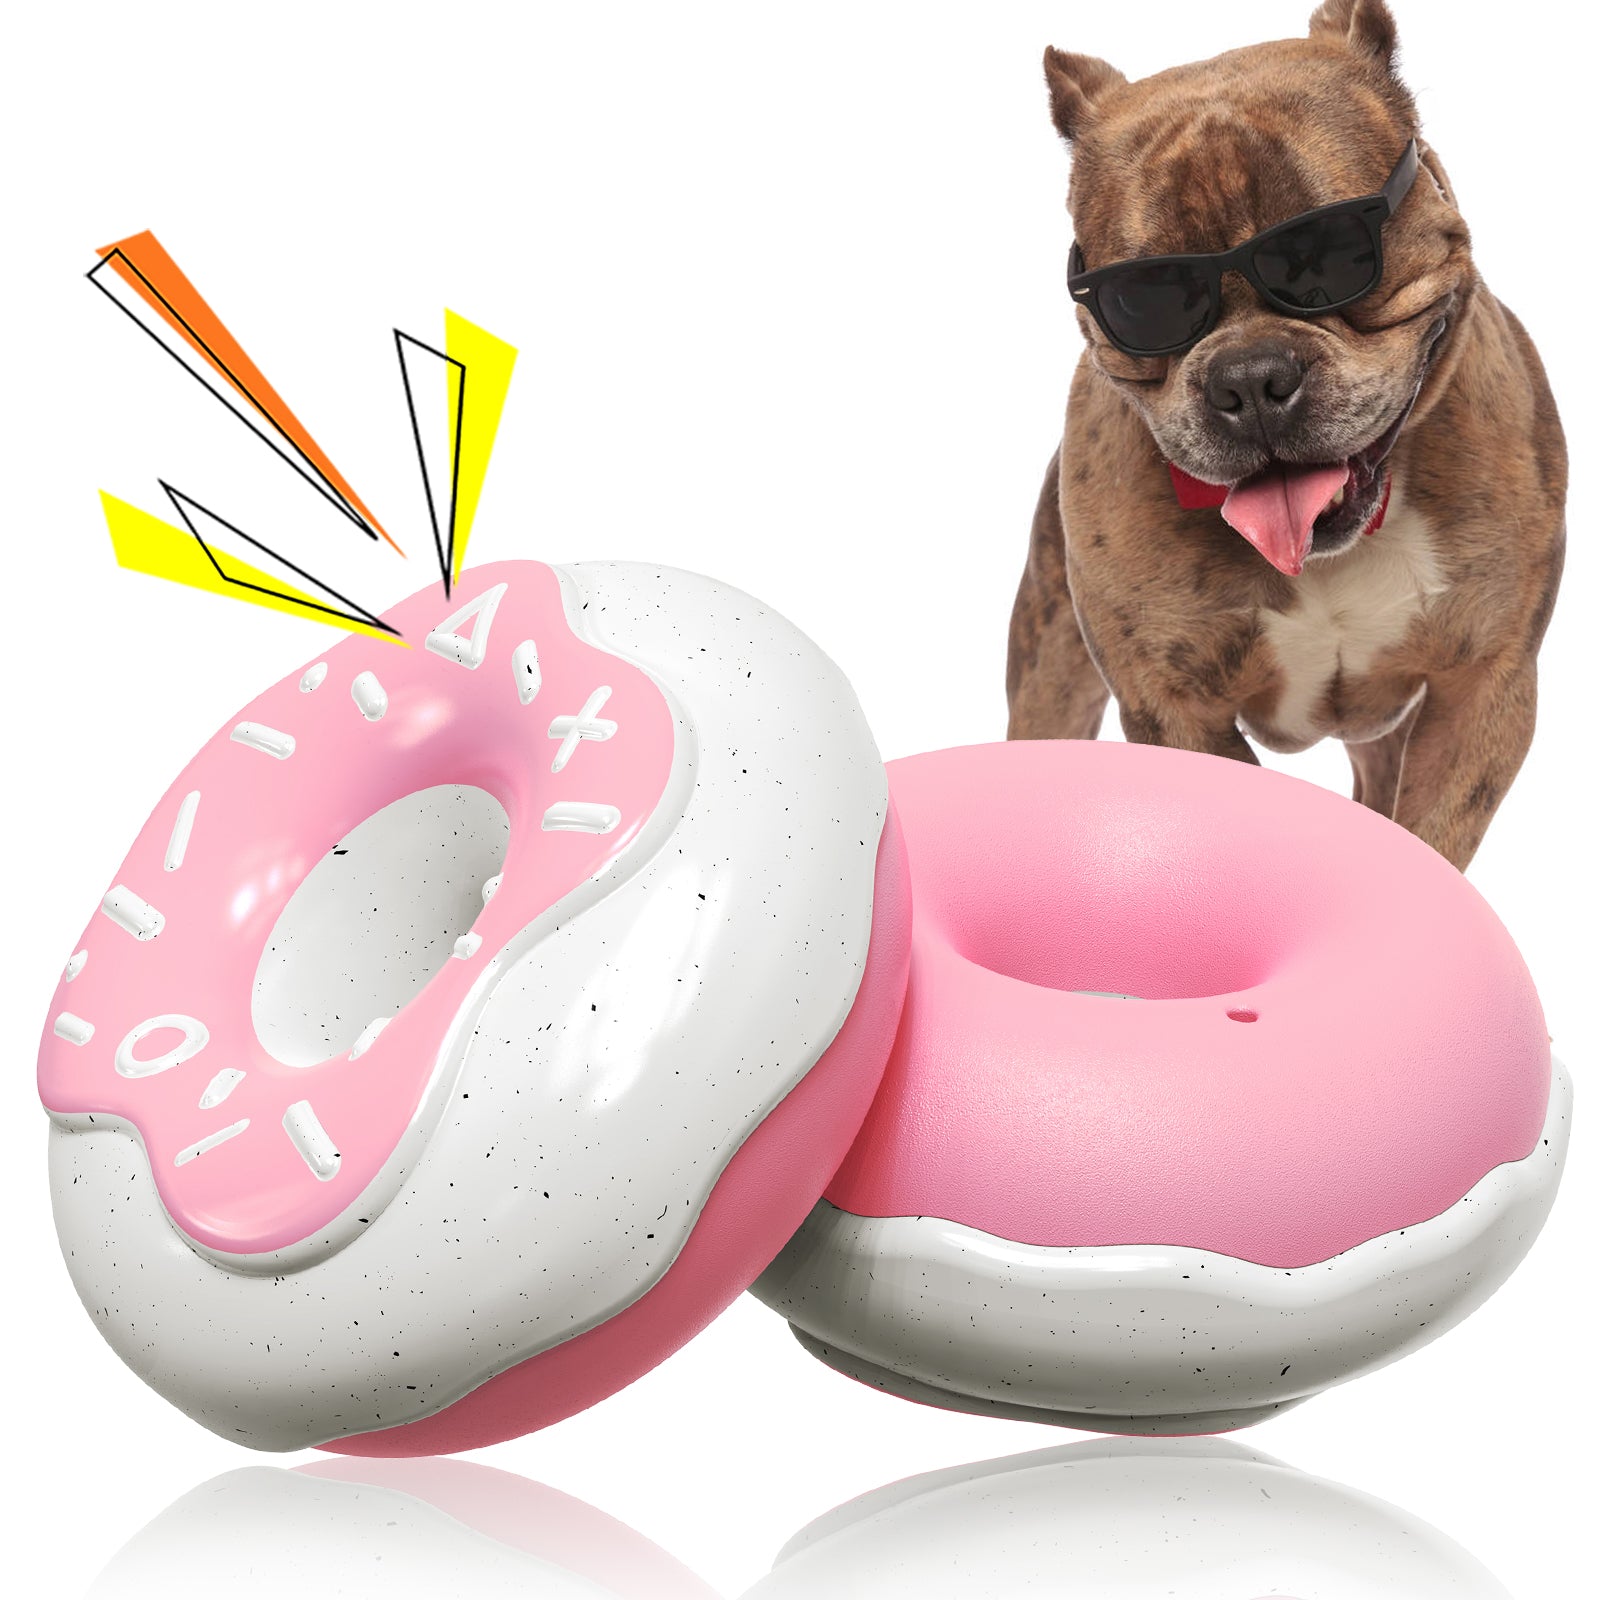 Dog Puzzle Toy, 3 In 1 Interactive Dog Toys With Squeak Function